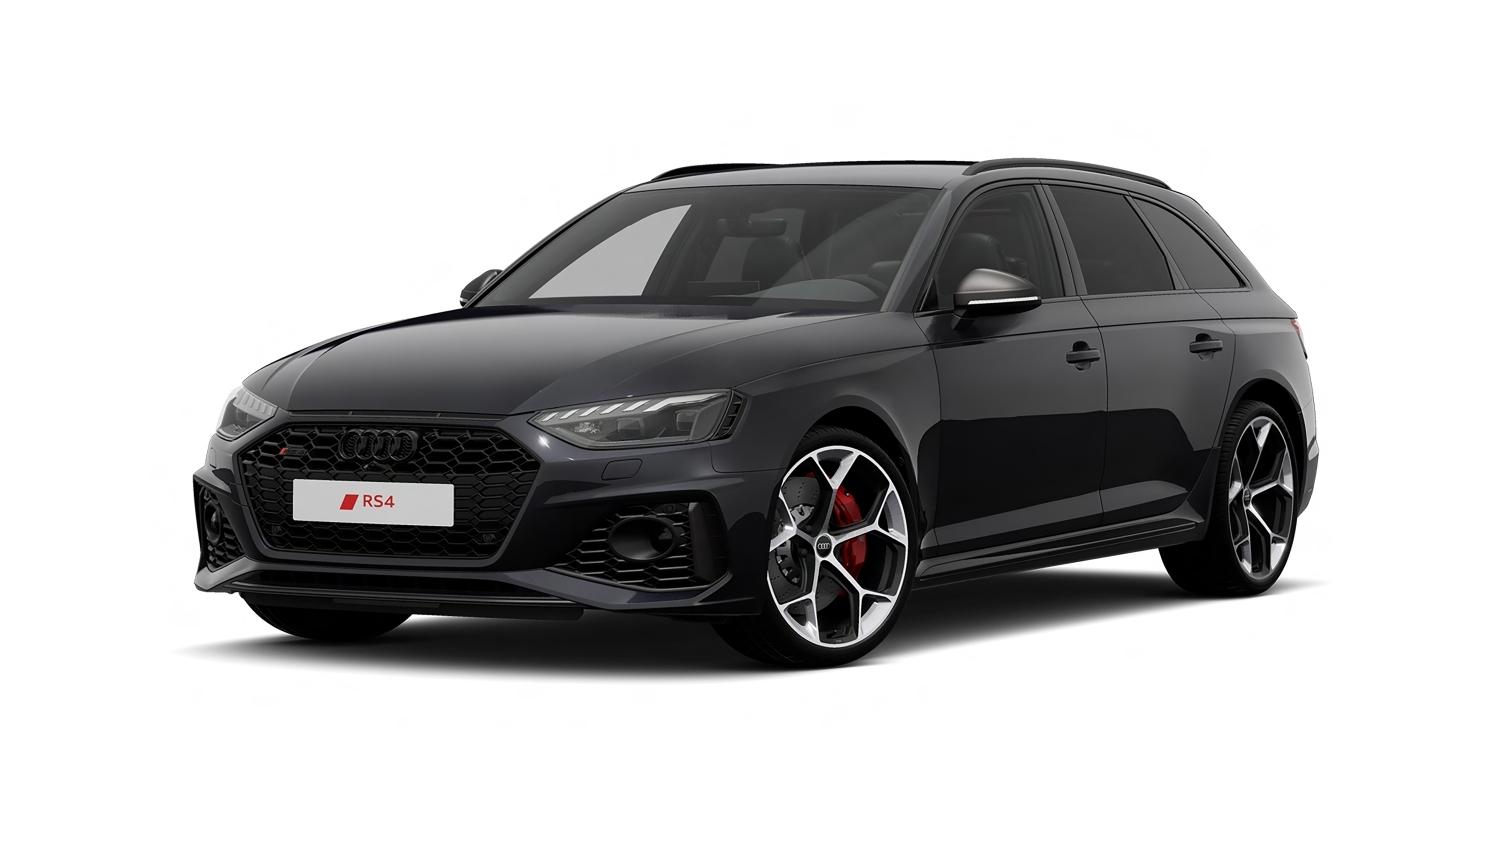 More information about "Streets ahead on road and track: the new Audi RS 4 Avant competition UK pricing and specification"